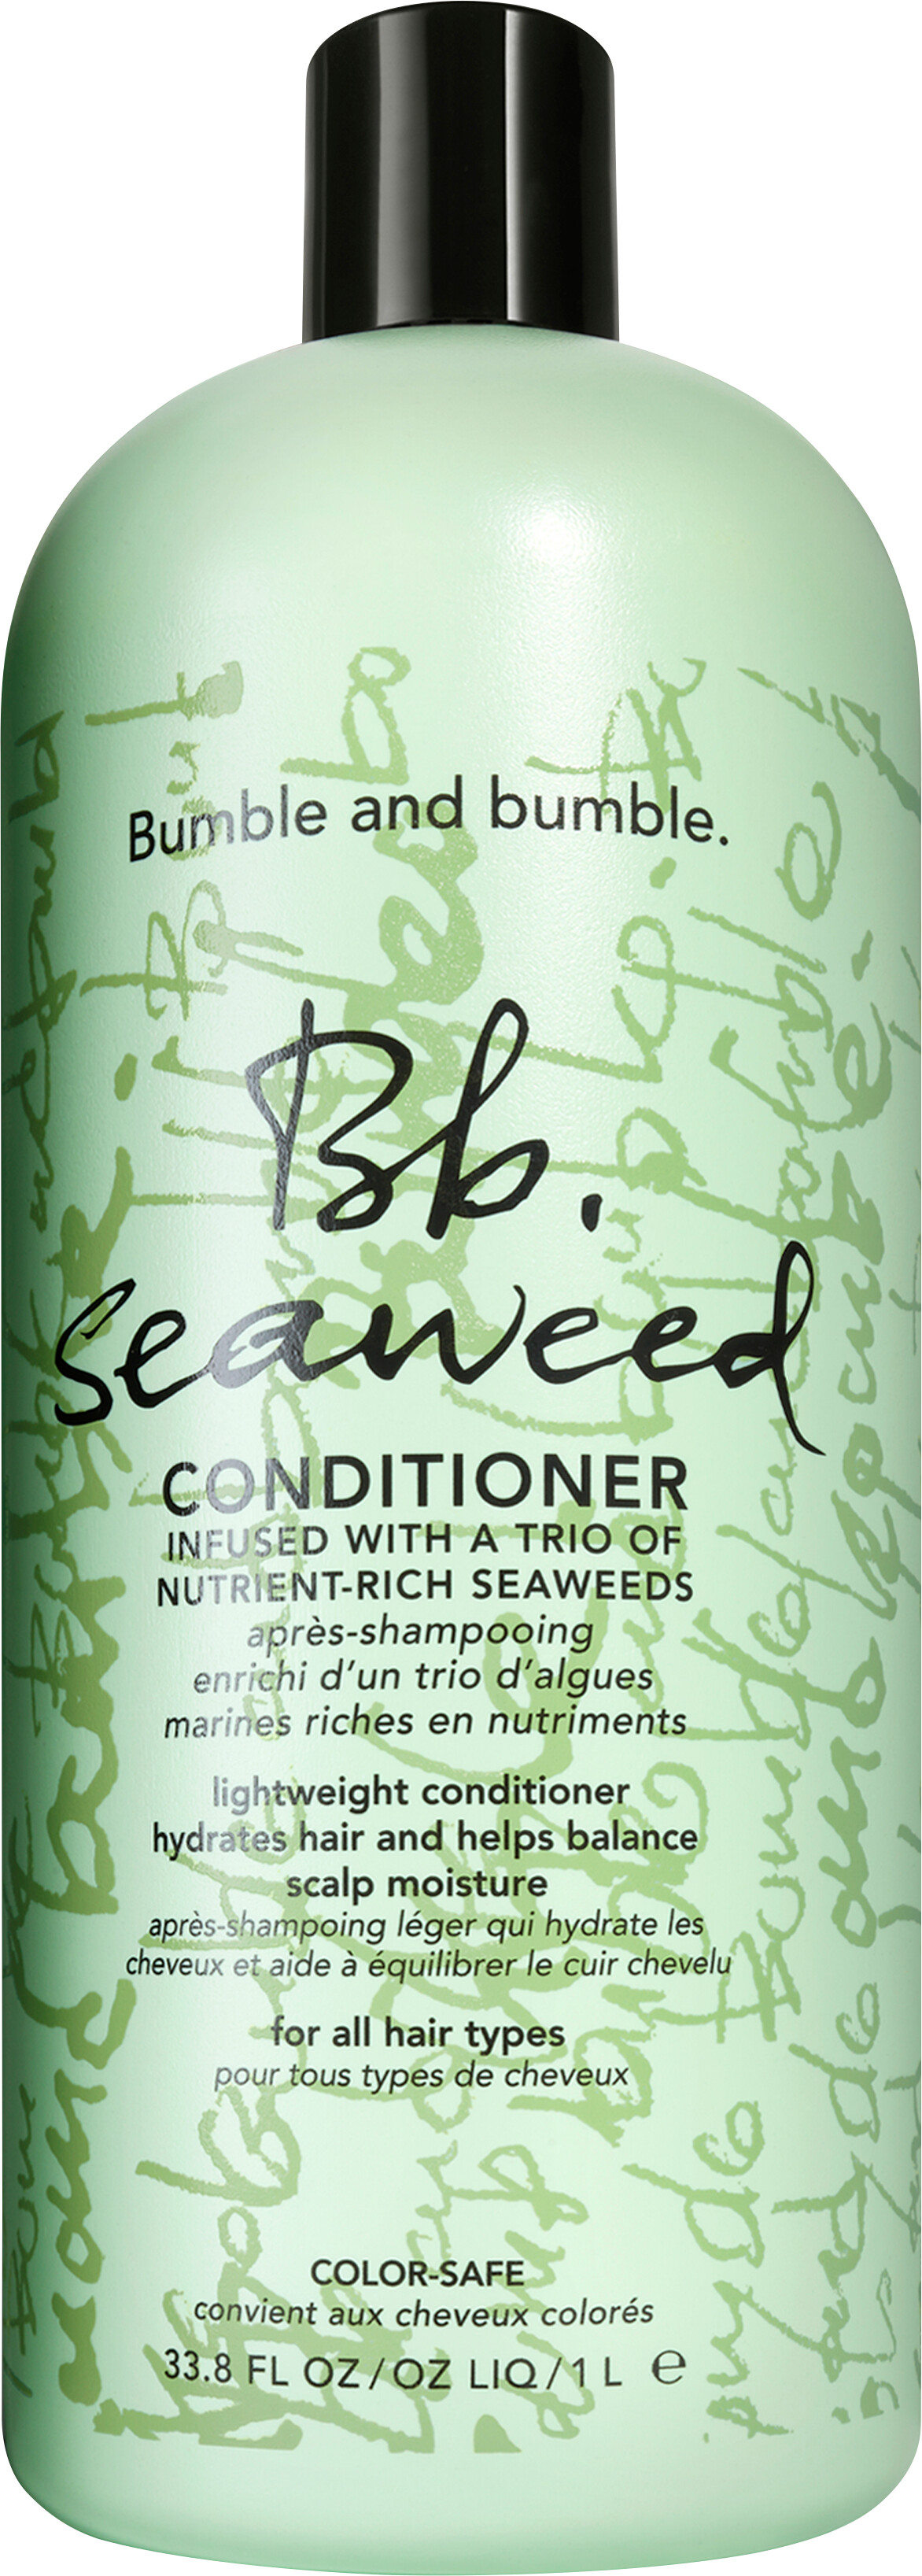 Bumble and bumble Seaweed Condtioner 1 litre